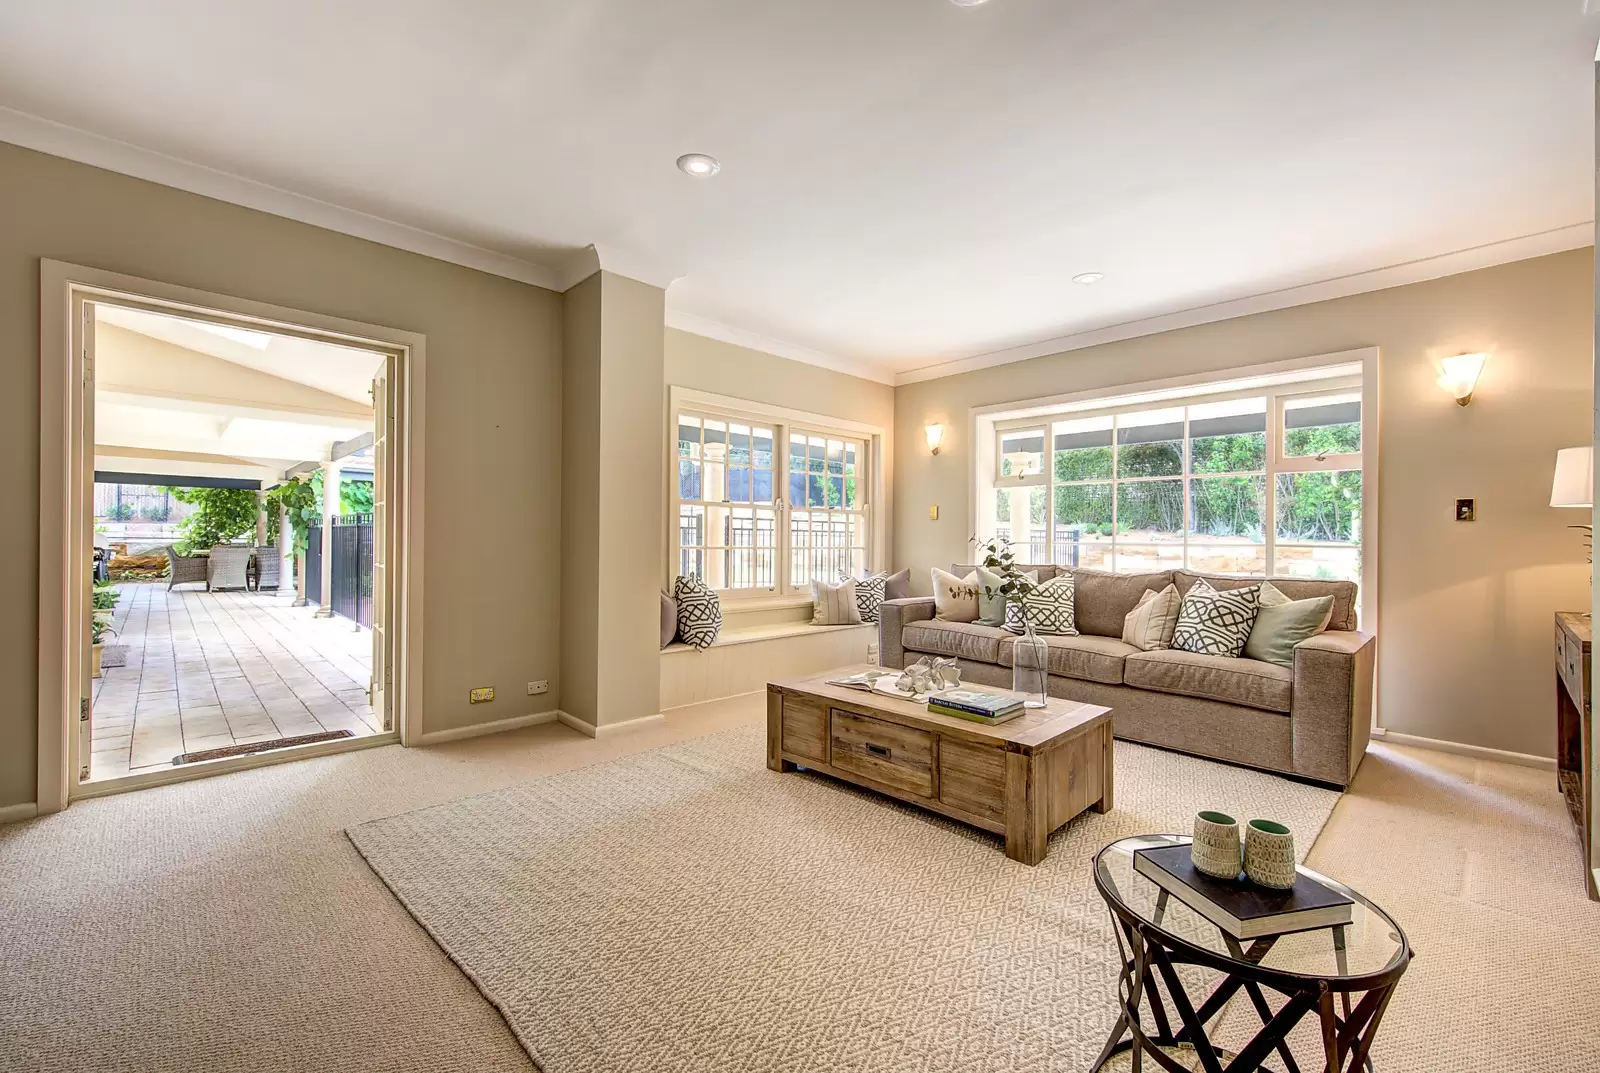 Photo #14: 8 Macquarie Road, Pymble - Sold by Sydney Sotheby's International Realty